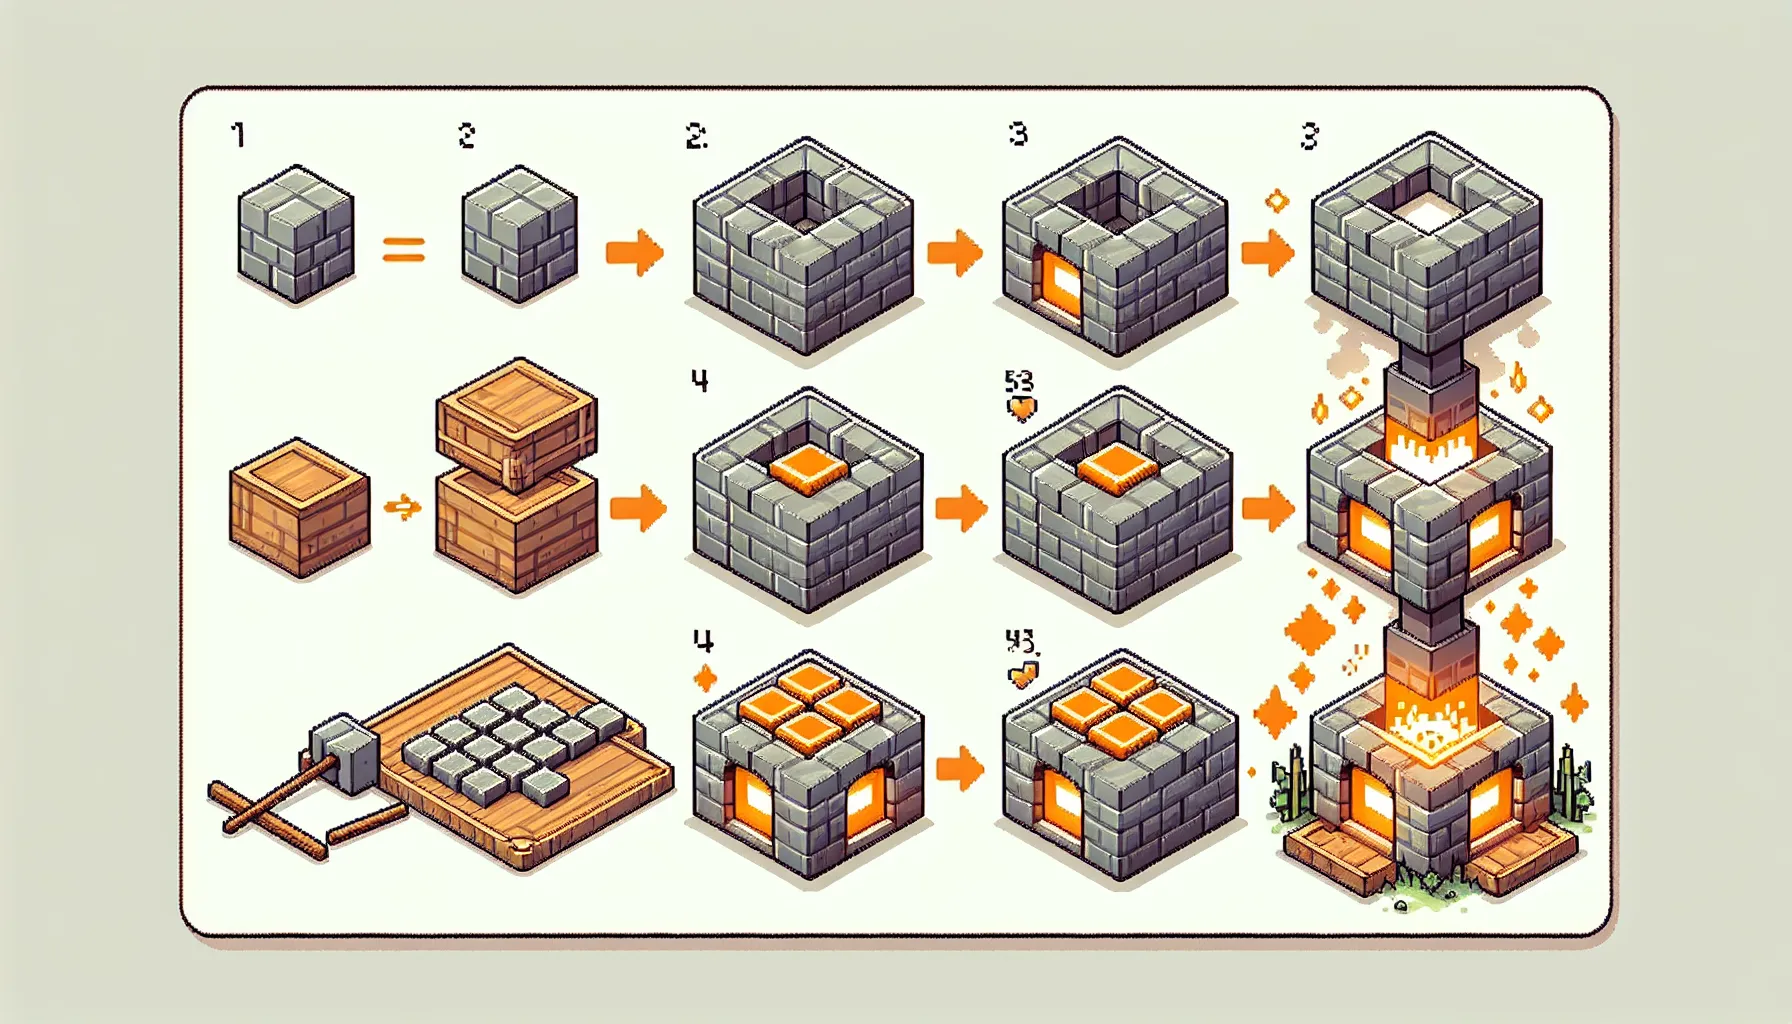 How to Make a Furnace in Minecraft: Step-by-Step Guide